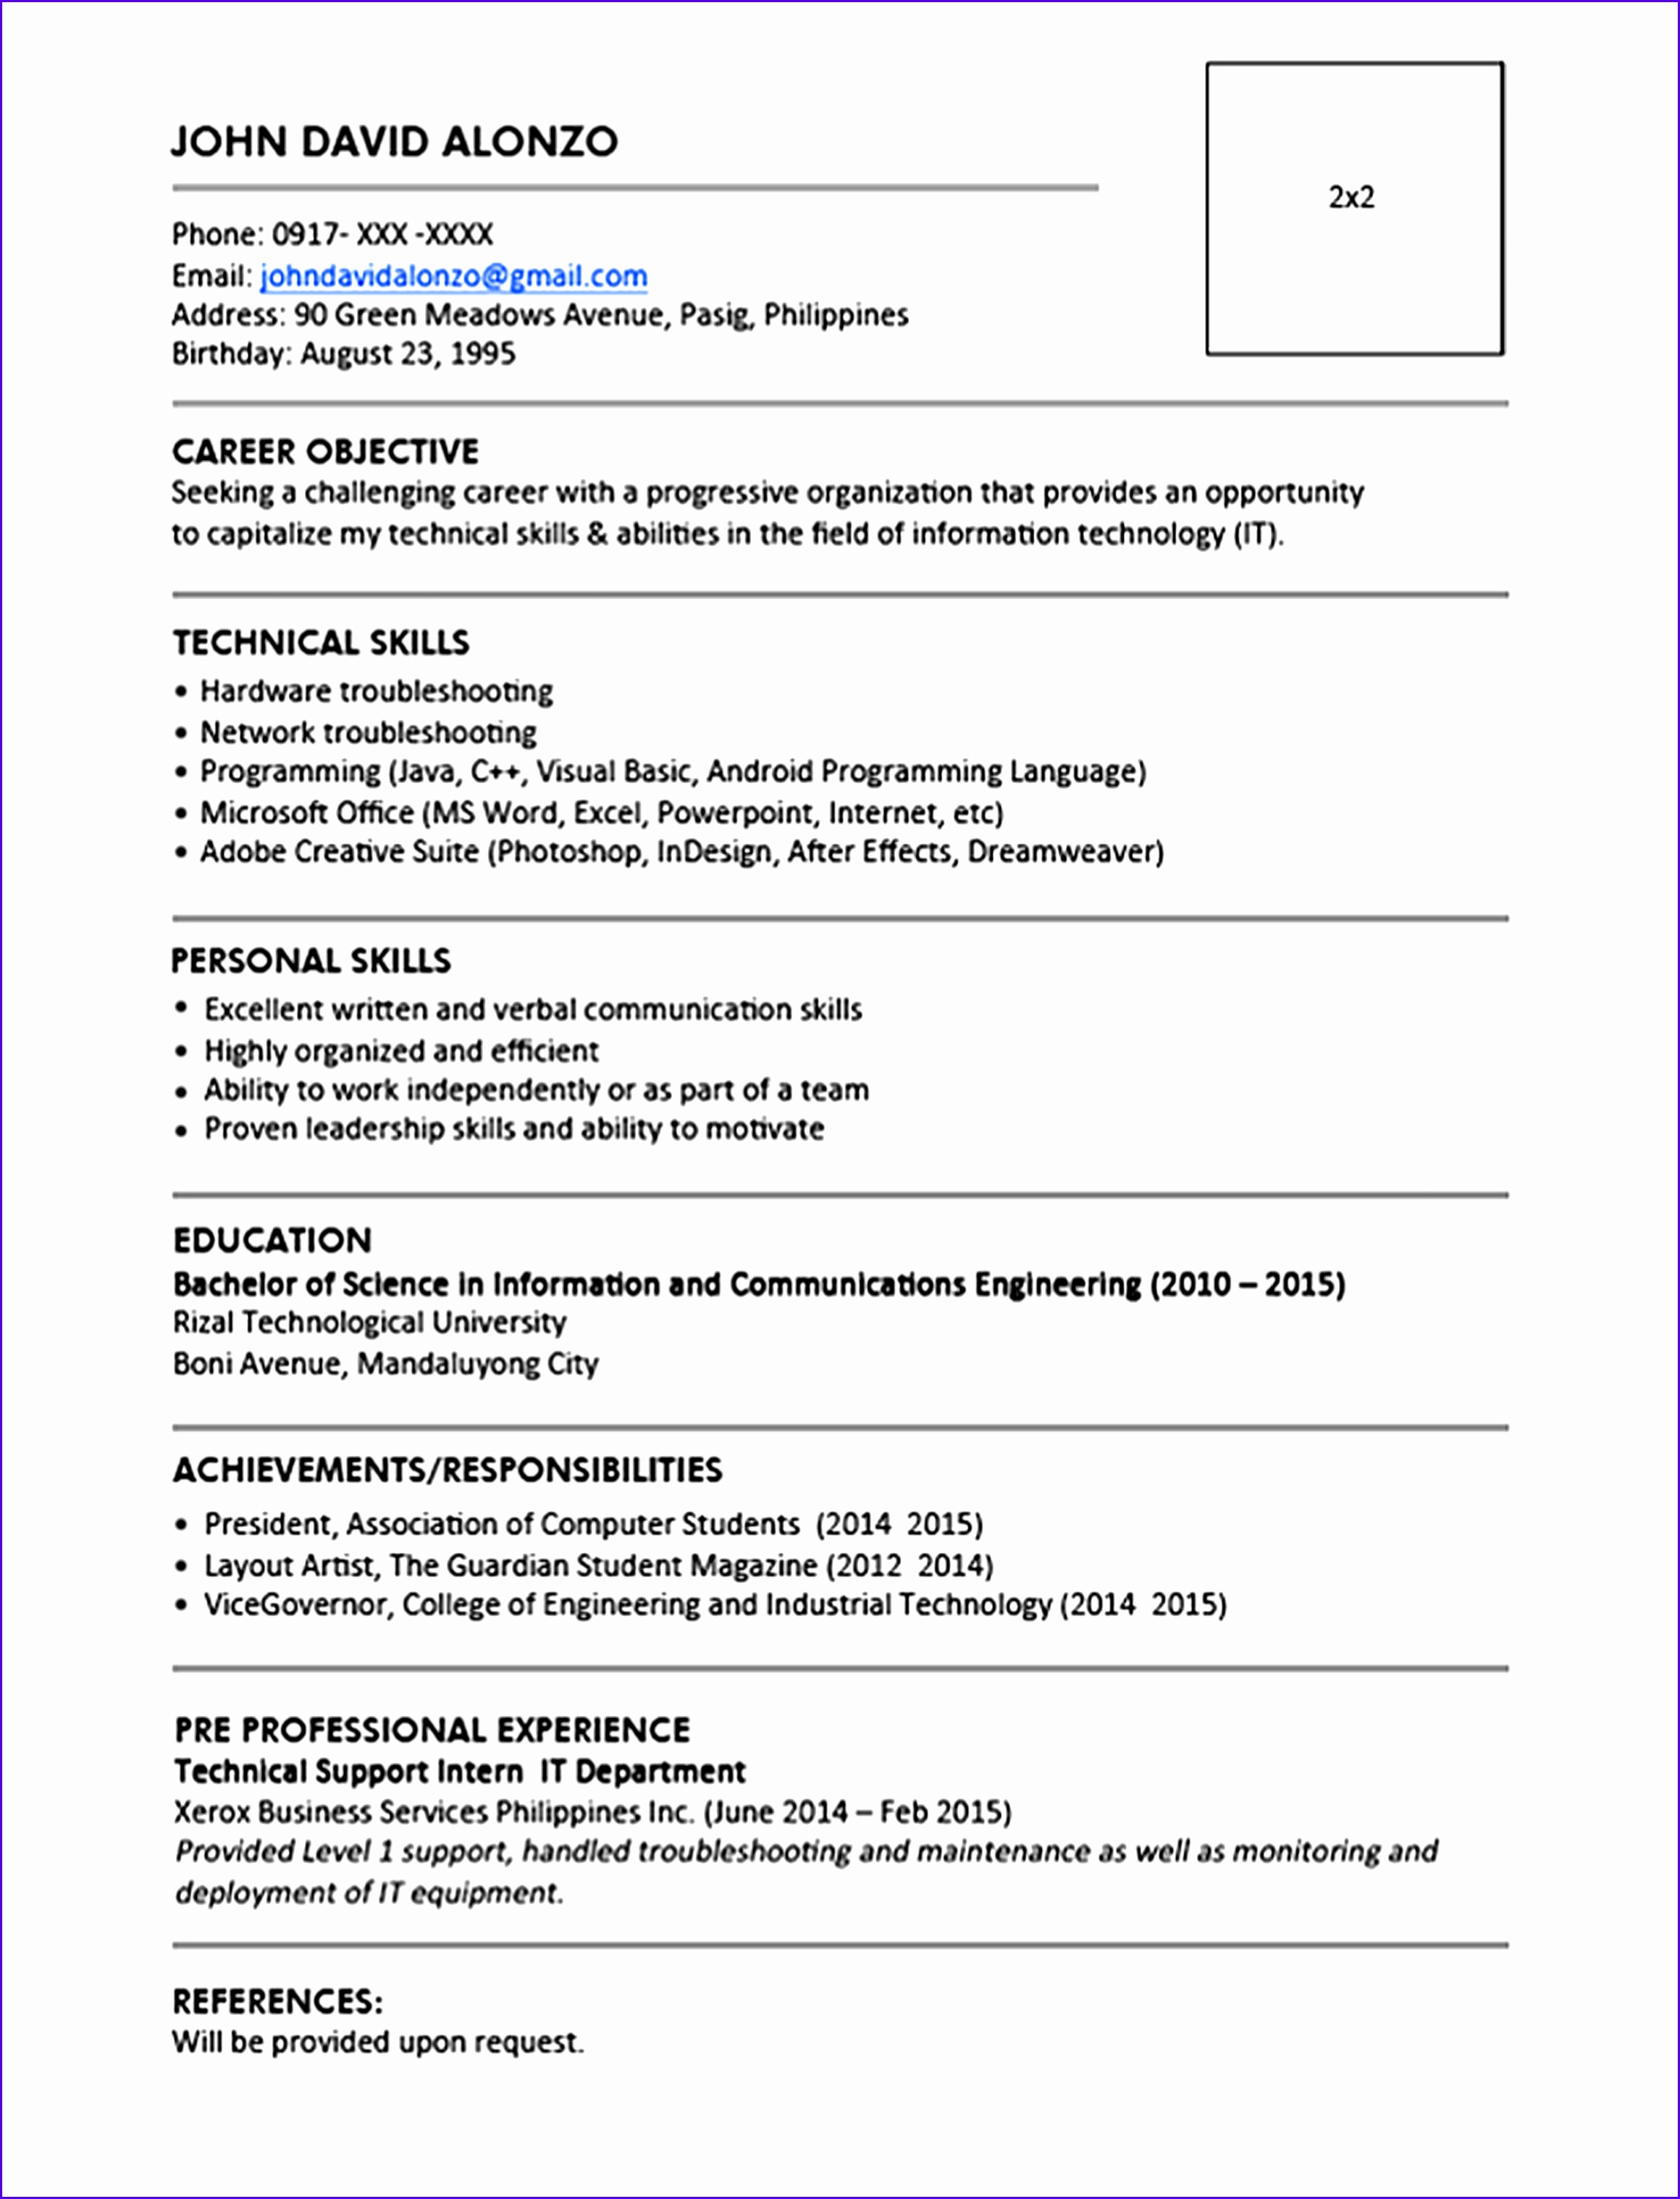 Sample Resume Format for Fresh Graduates e Page Format 1 23203036